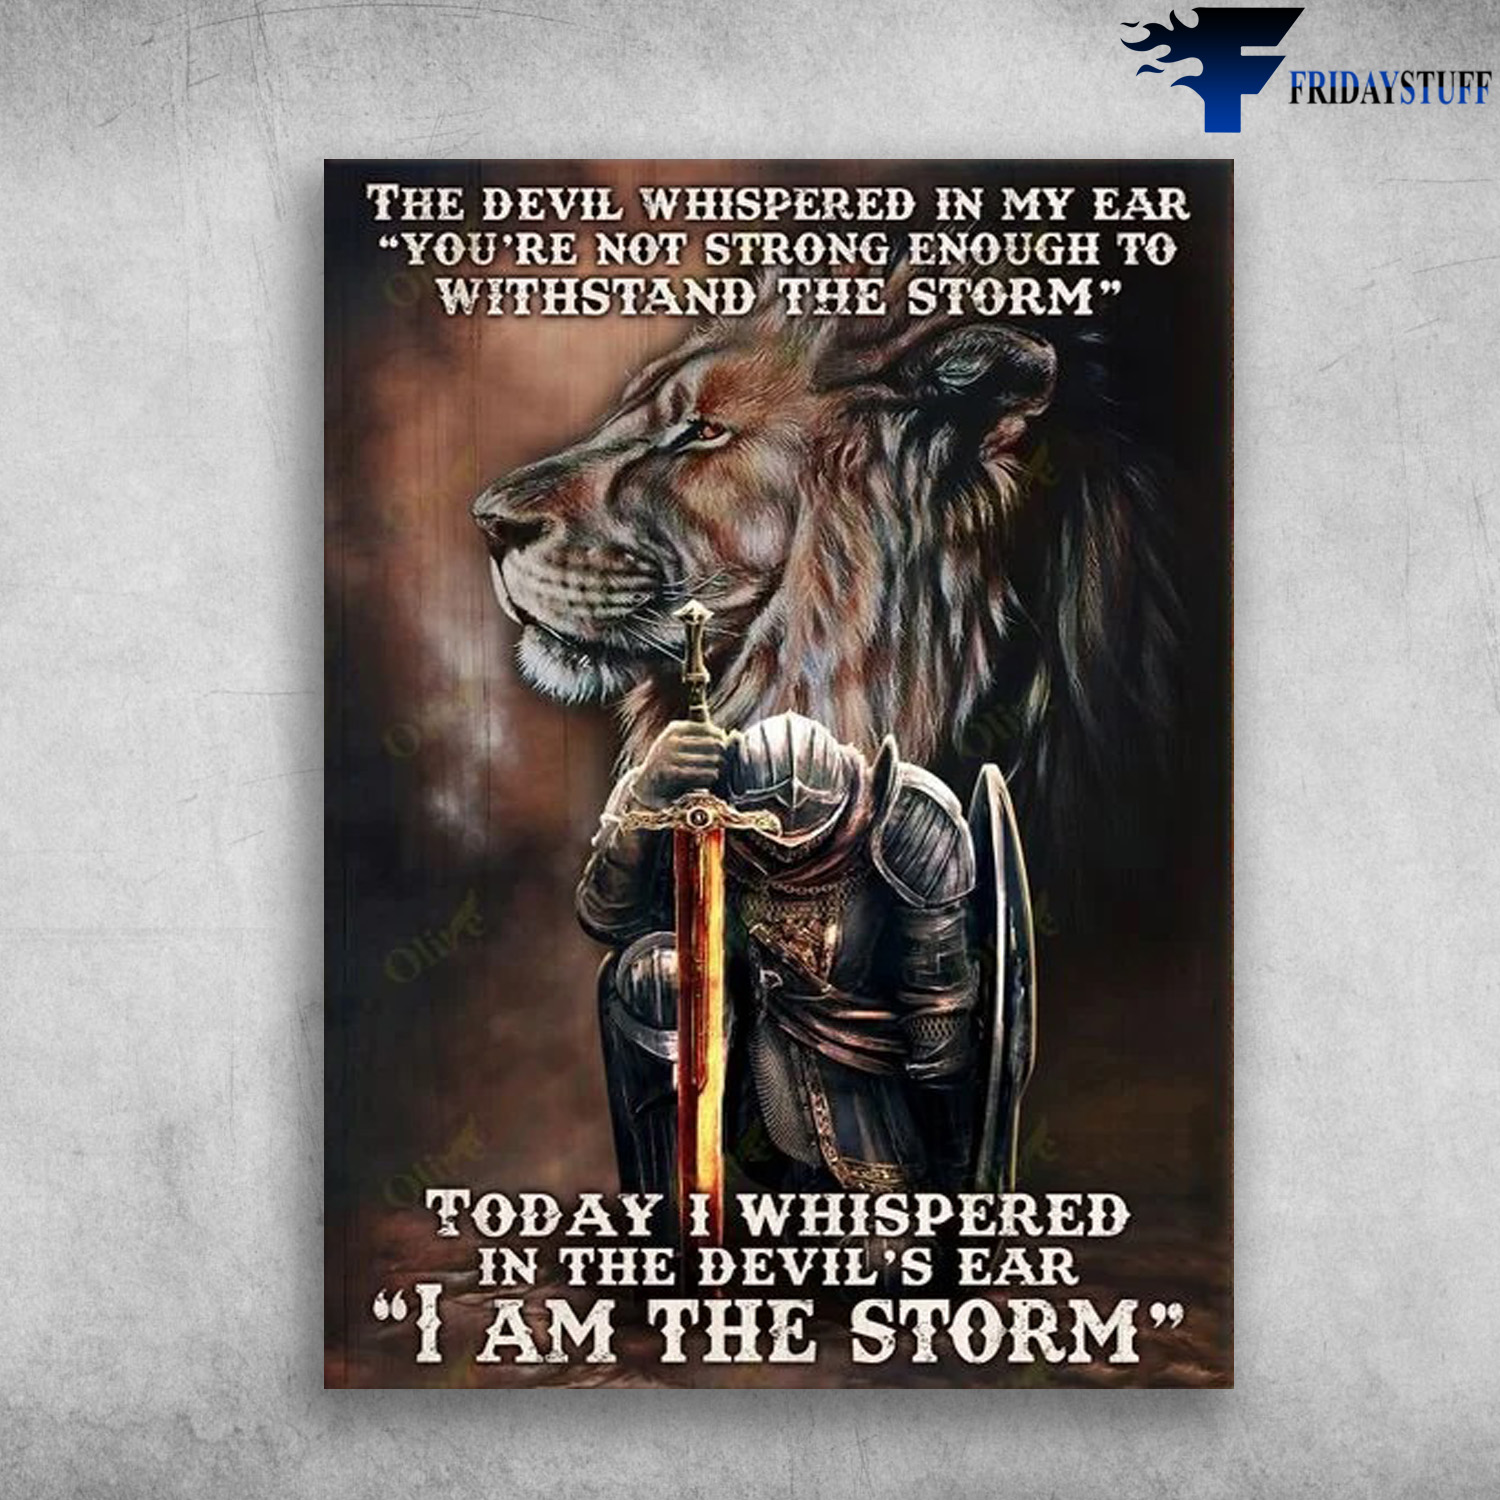 Lion - Tell the devil Whispered In My Ear, You Are Not Strong Enough To Withstand Tha Storm, Today I Whispered In The Devil's Ear, I Am The Storm